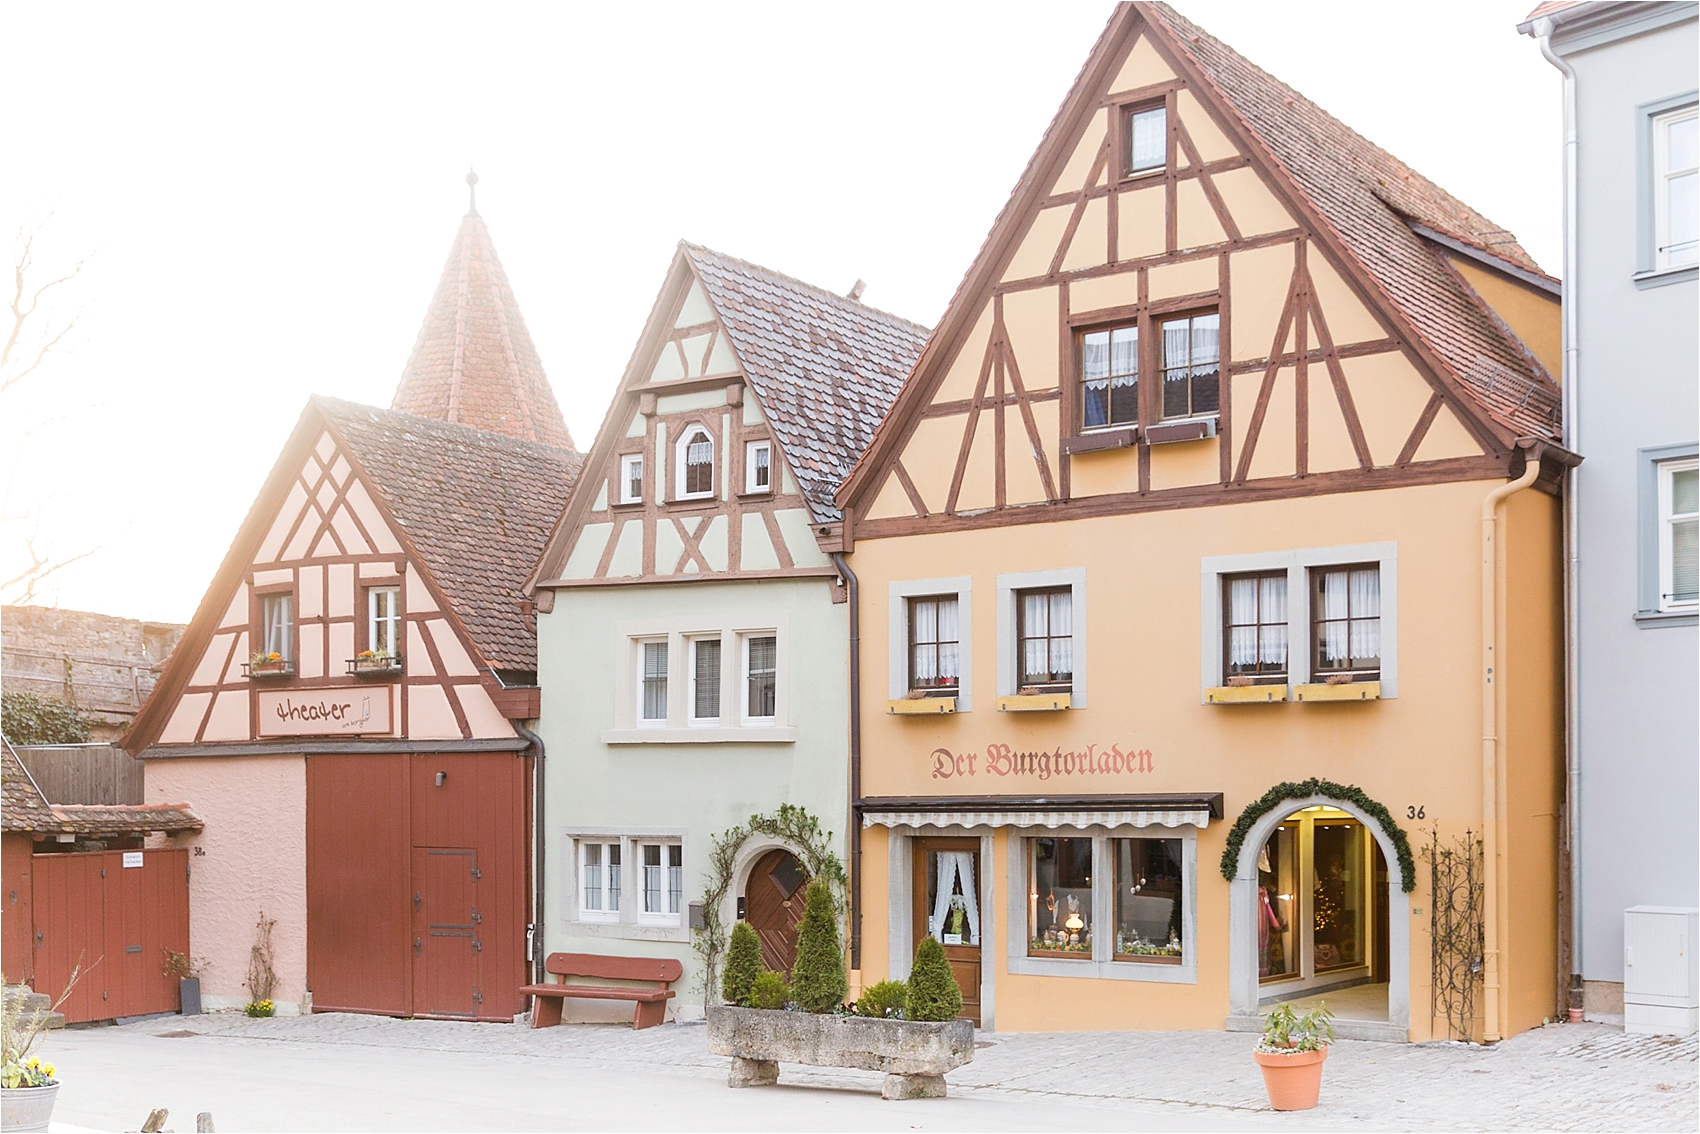 Rothenberg, Germany - A Real Life Fairytale Storybook Town